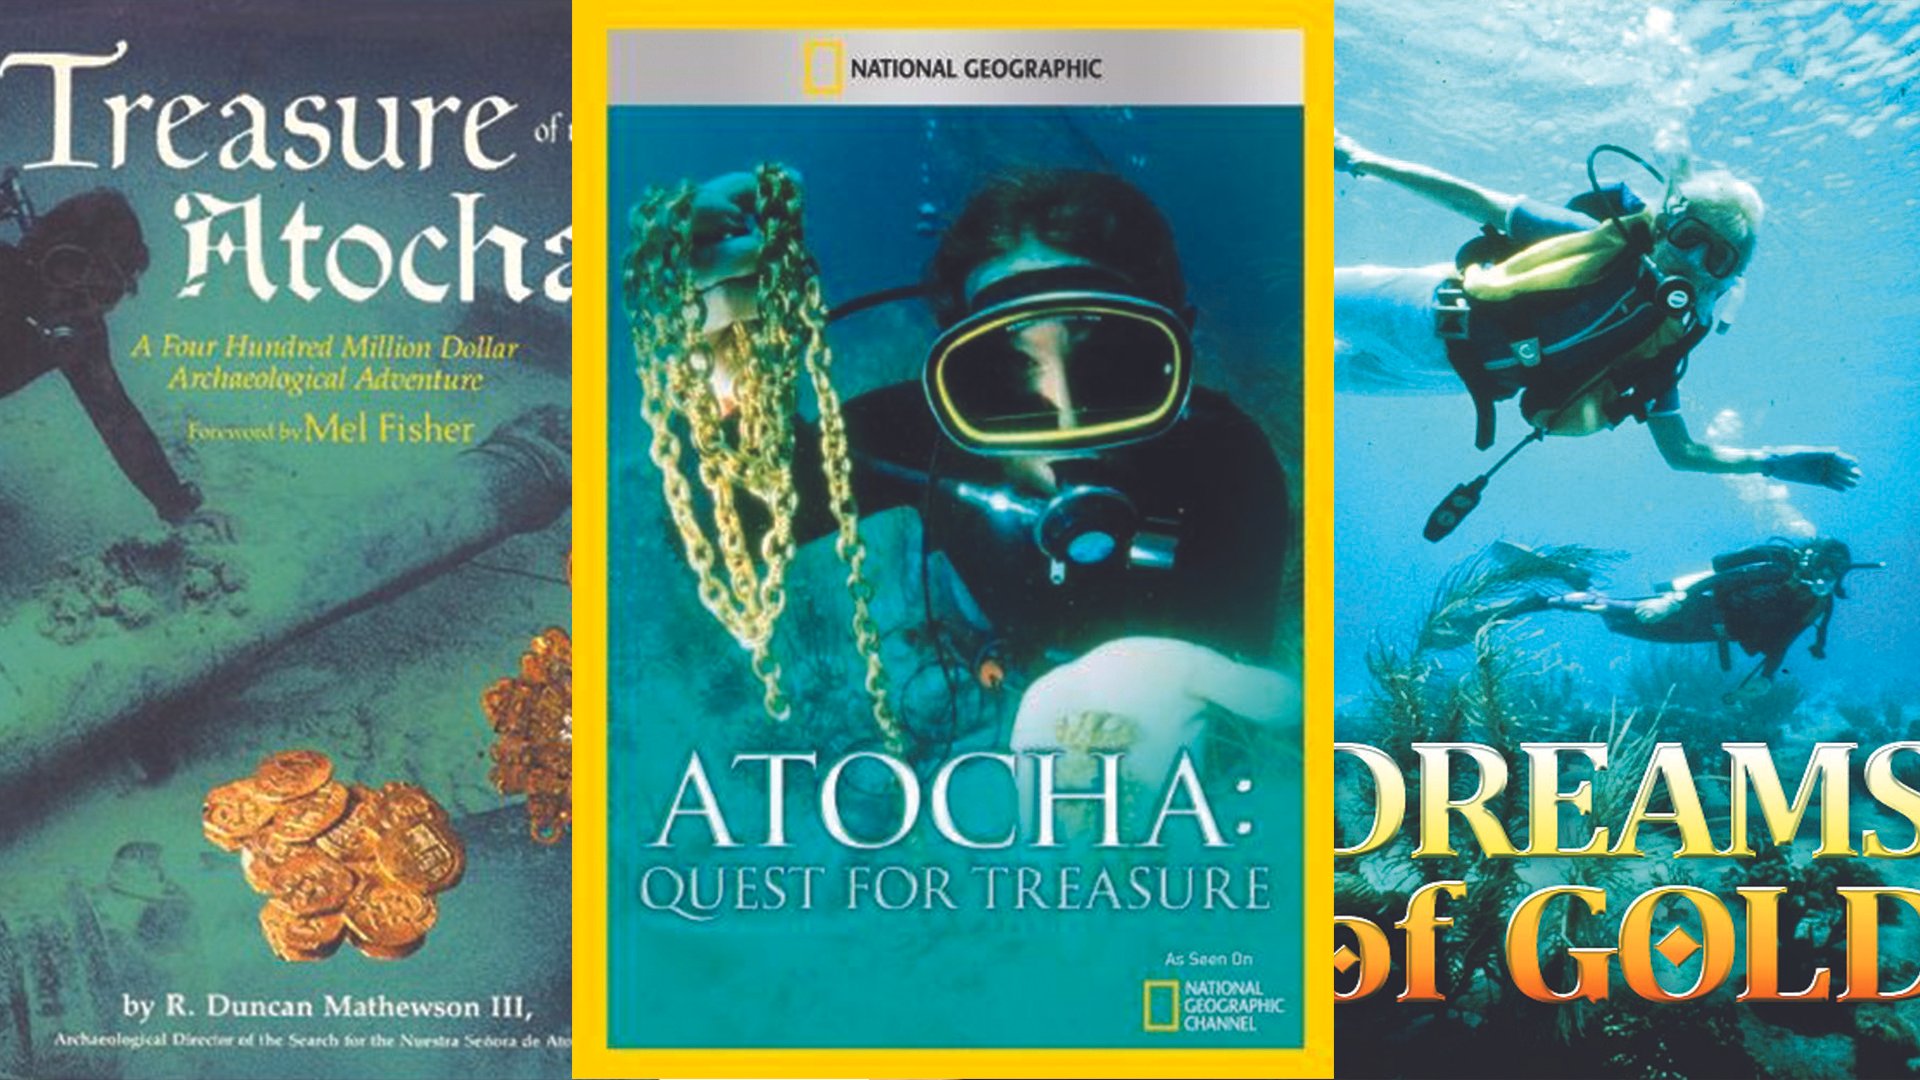 National Geographic - Treasures of the Atocha Shipwreck